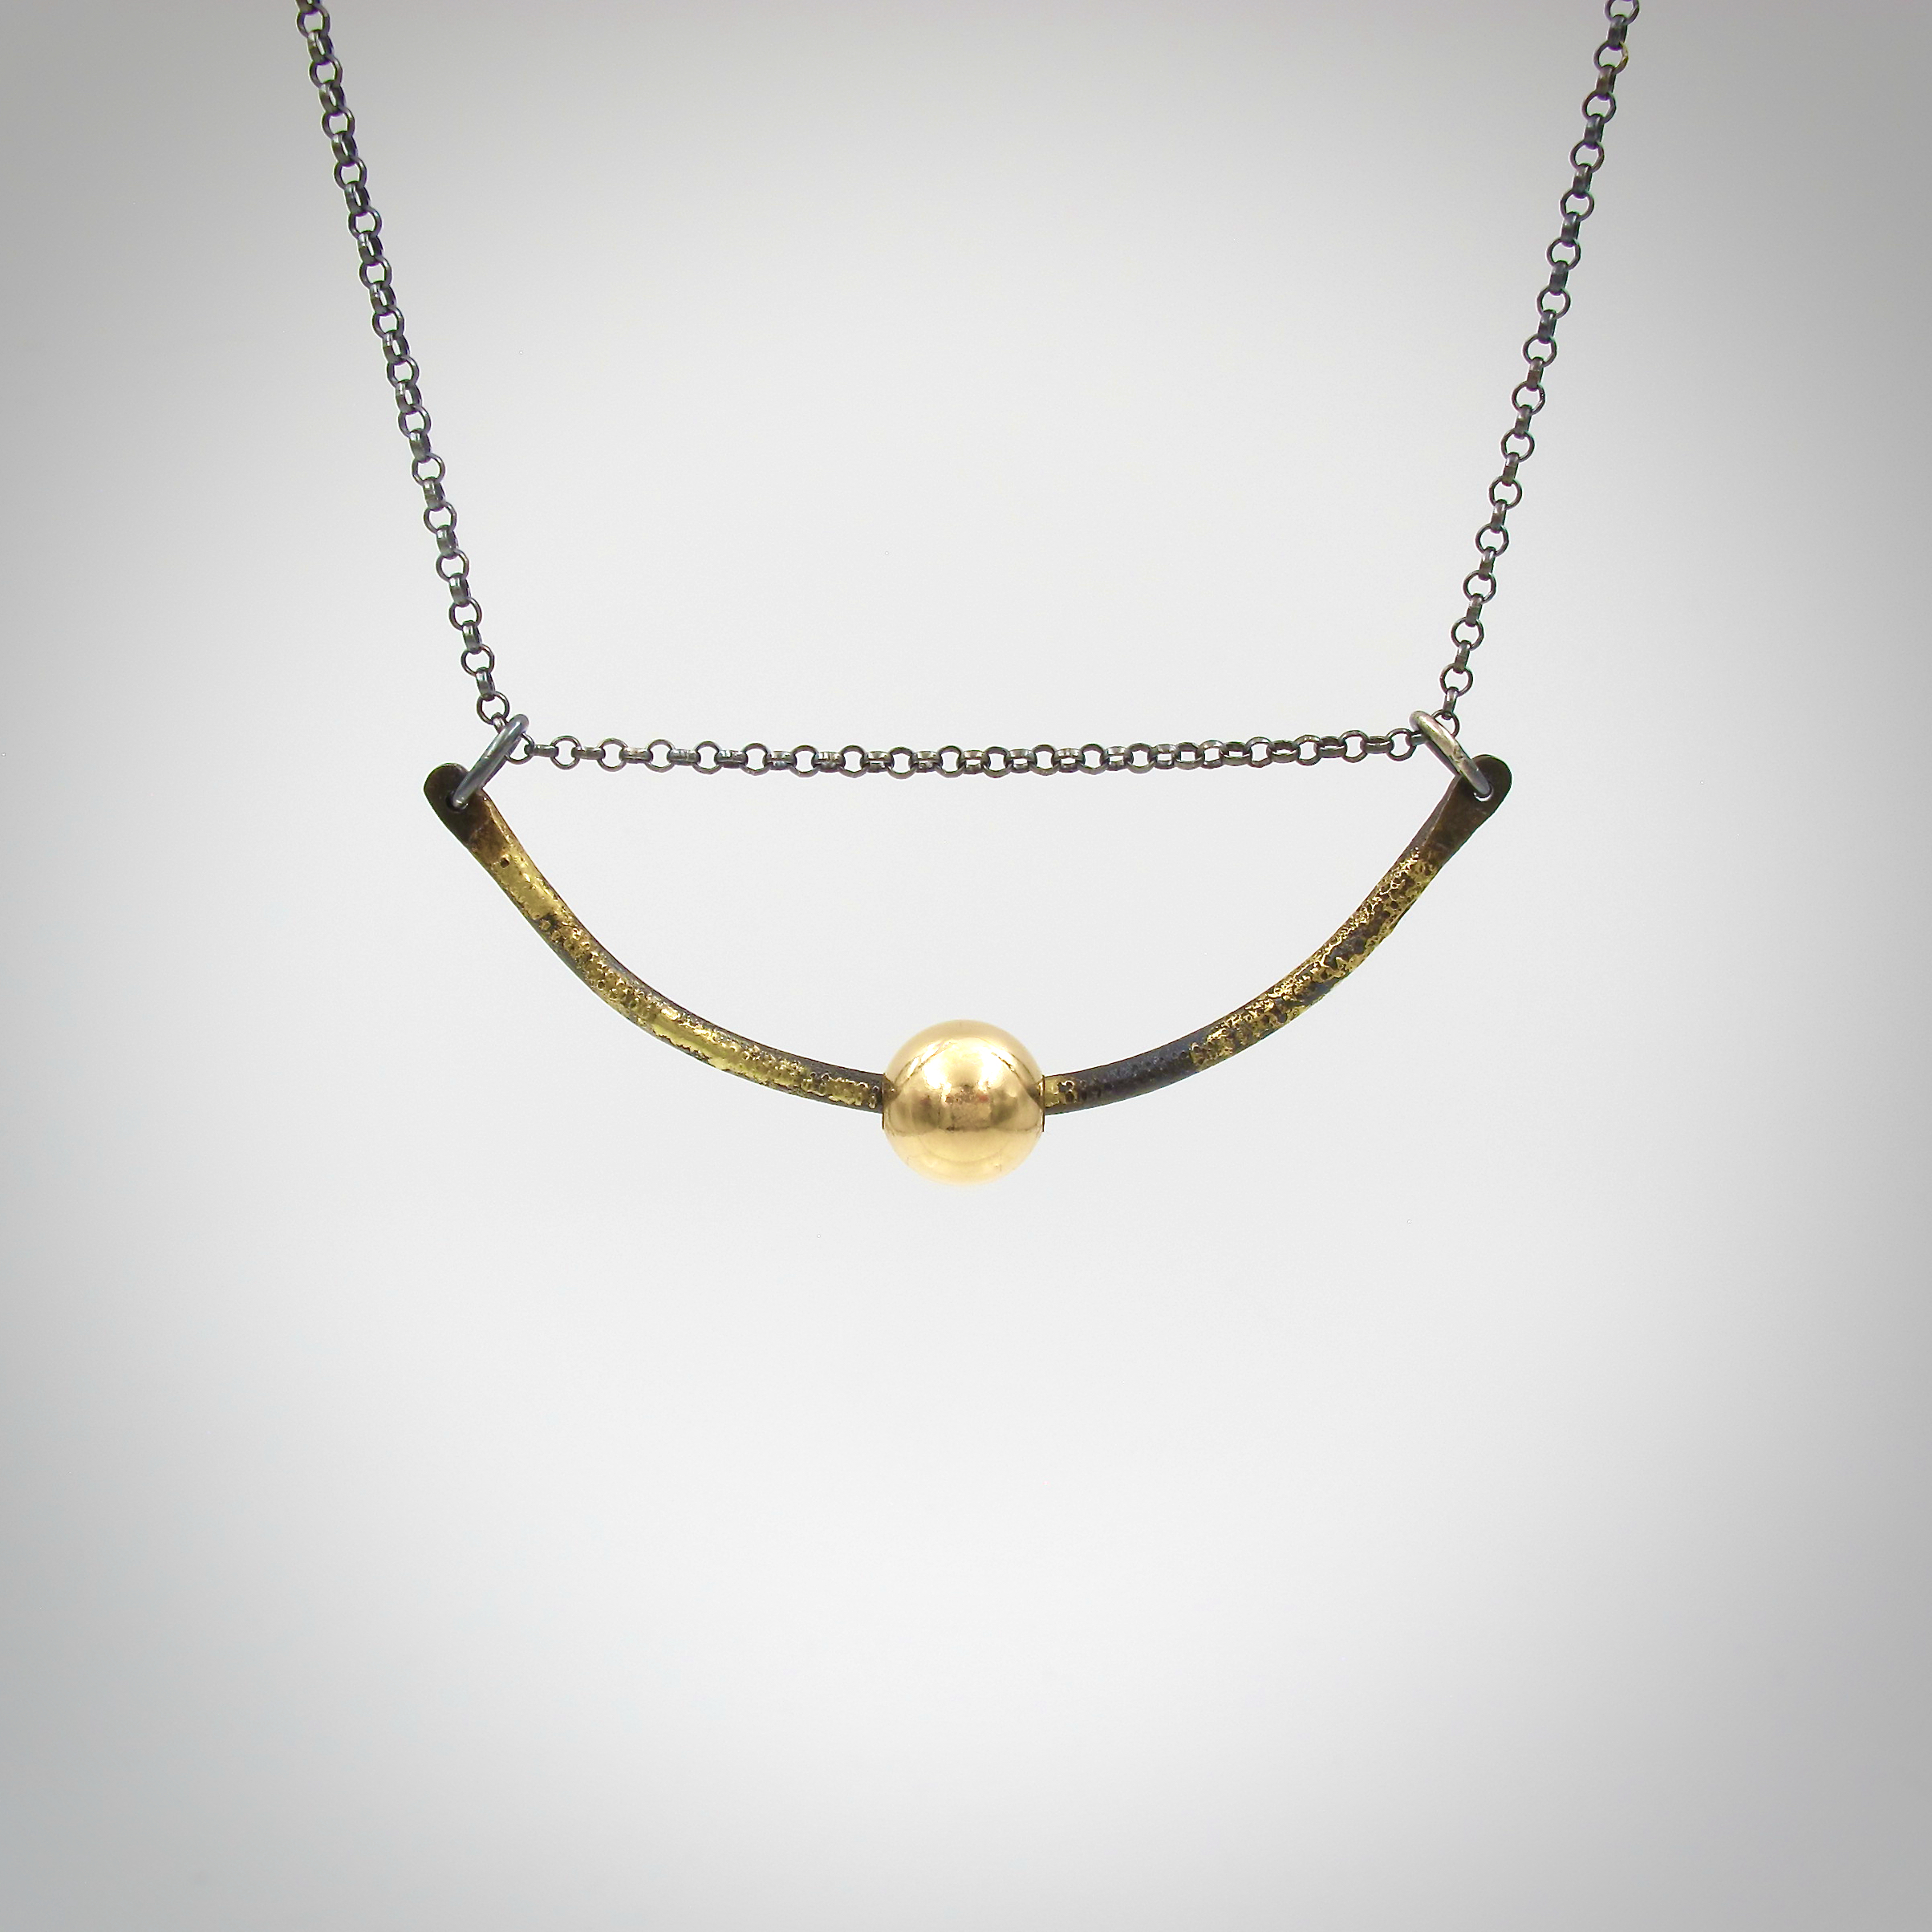 Steel and gold necklace